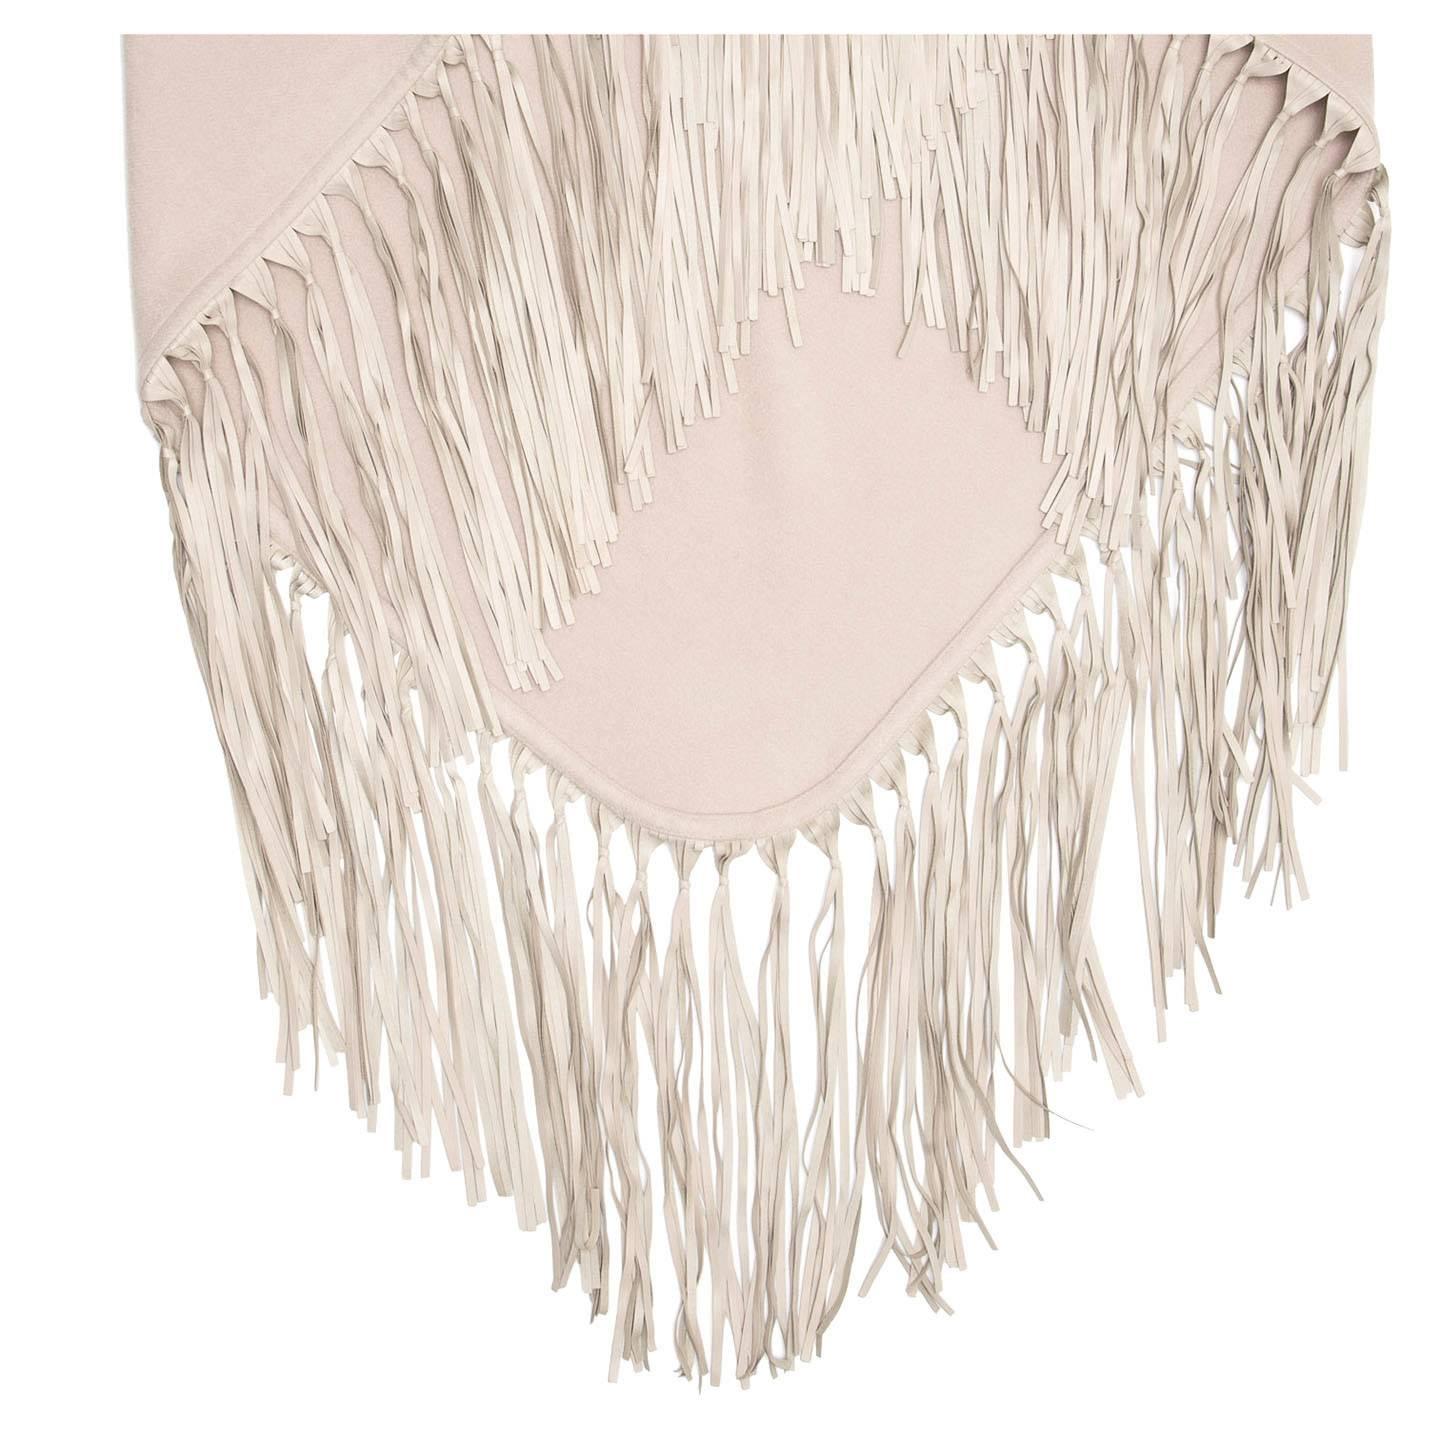 Taupe triangular large cashmere scarf with tone-on-tone leather fringes on two sides. Made in France.

Size  H 38” L 78”
Condition  Excellent: never used in original box